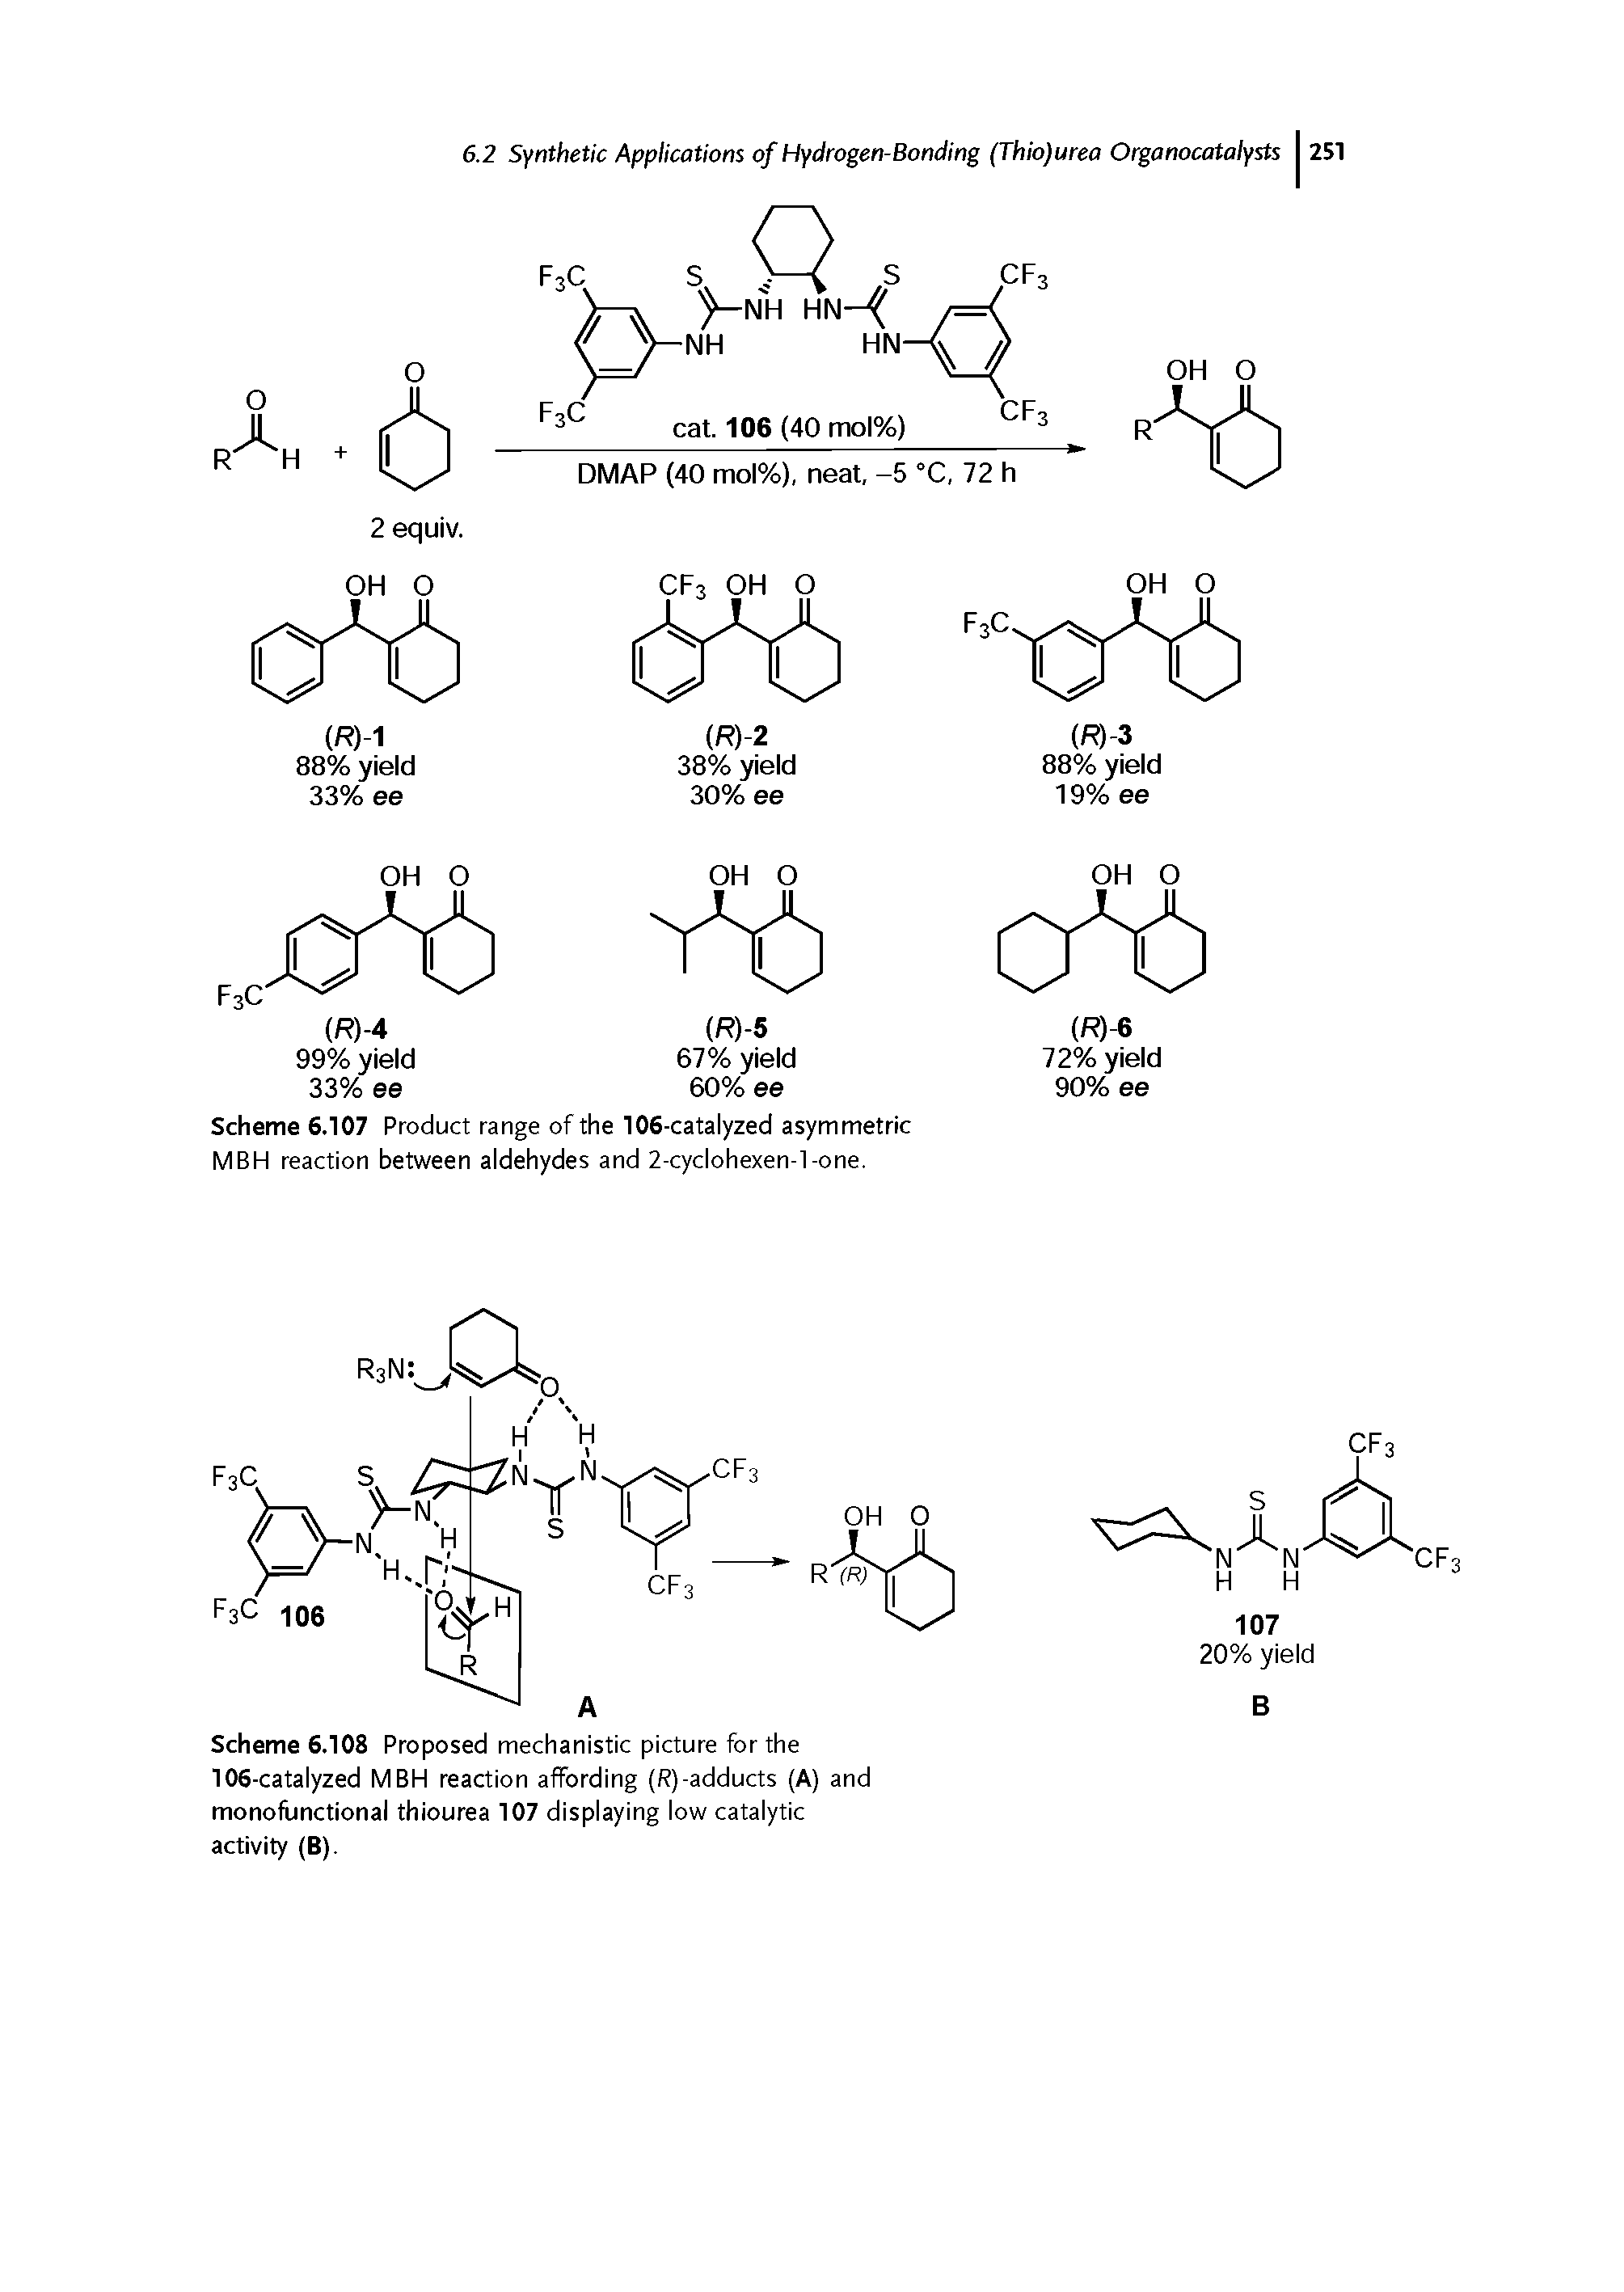 Scheme 6.108 Proposed mechanistic picture for the 106-catalyzed MBH reaction affording (R)-adducts (A) and monofunctional thiourea 107 displaying low catalytic activity (B).